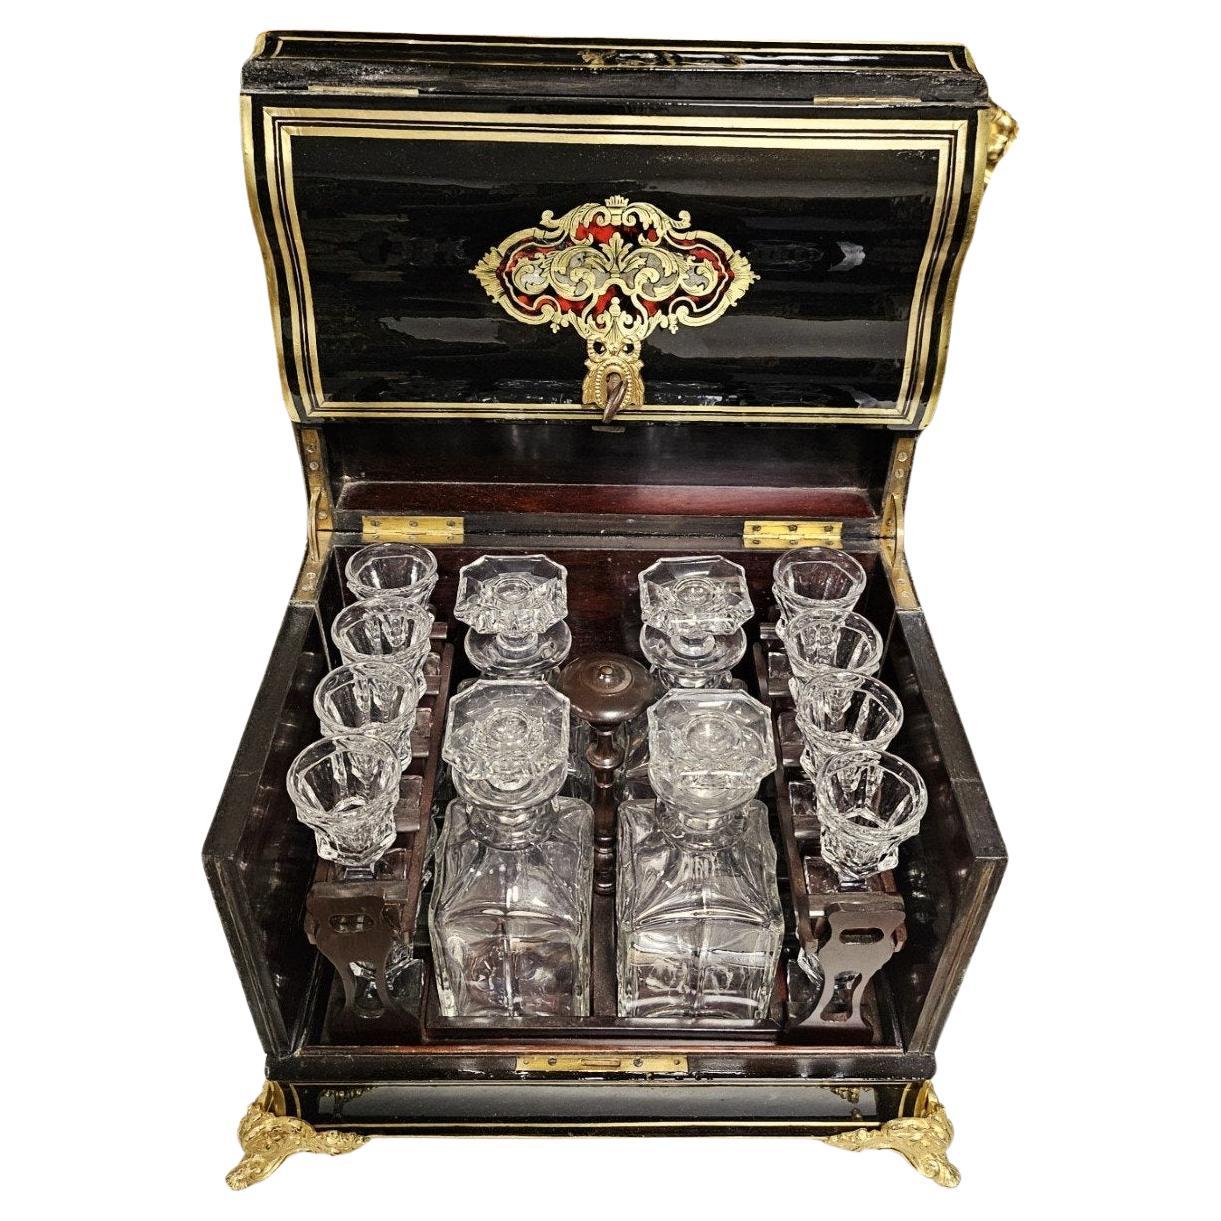 Beautiful liquor cabinet  cellaret dry bar in brass Boulle marquetry and mother-of-pearl inlays. Tripled brass threads with fine thread in the center, two cartridges rimmed with ornate ingot molds. Rich ornamentation of gilded bronzes with ingot